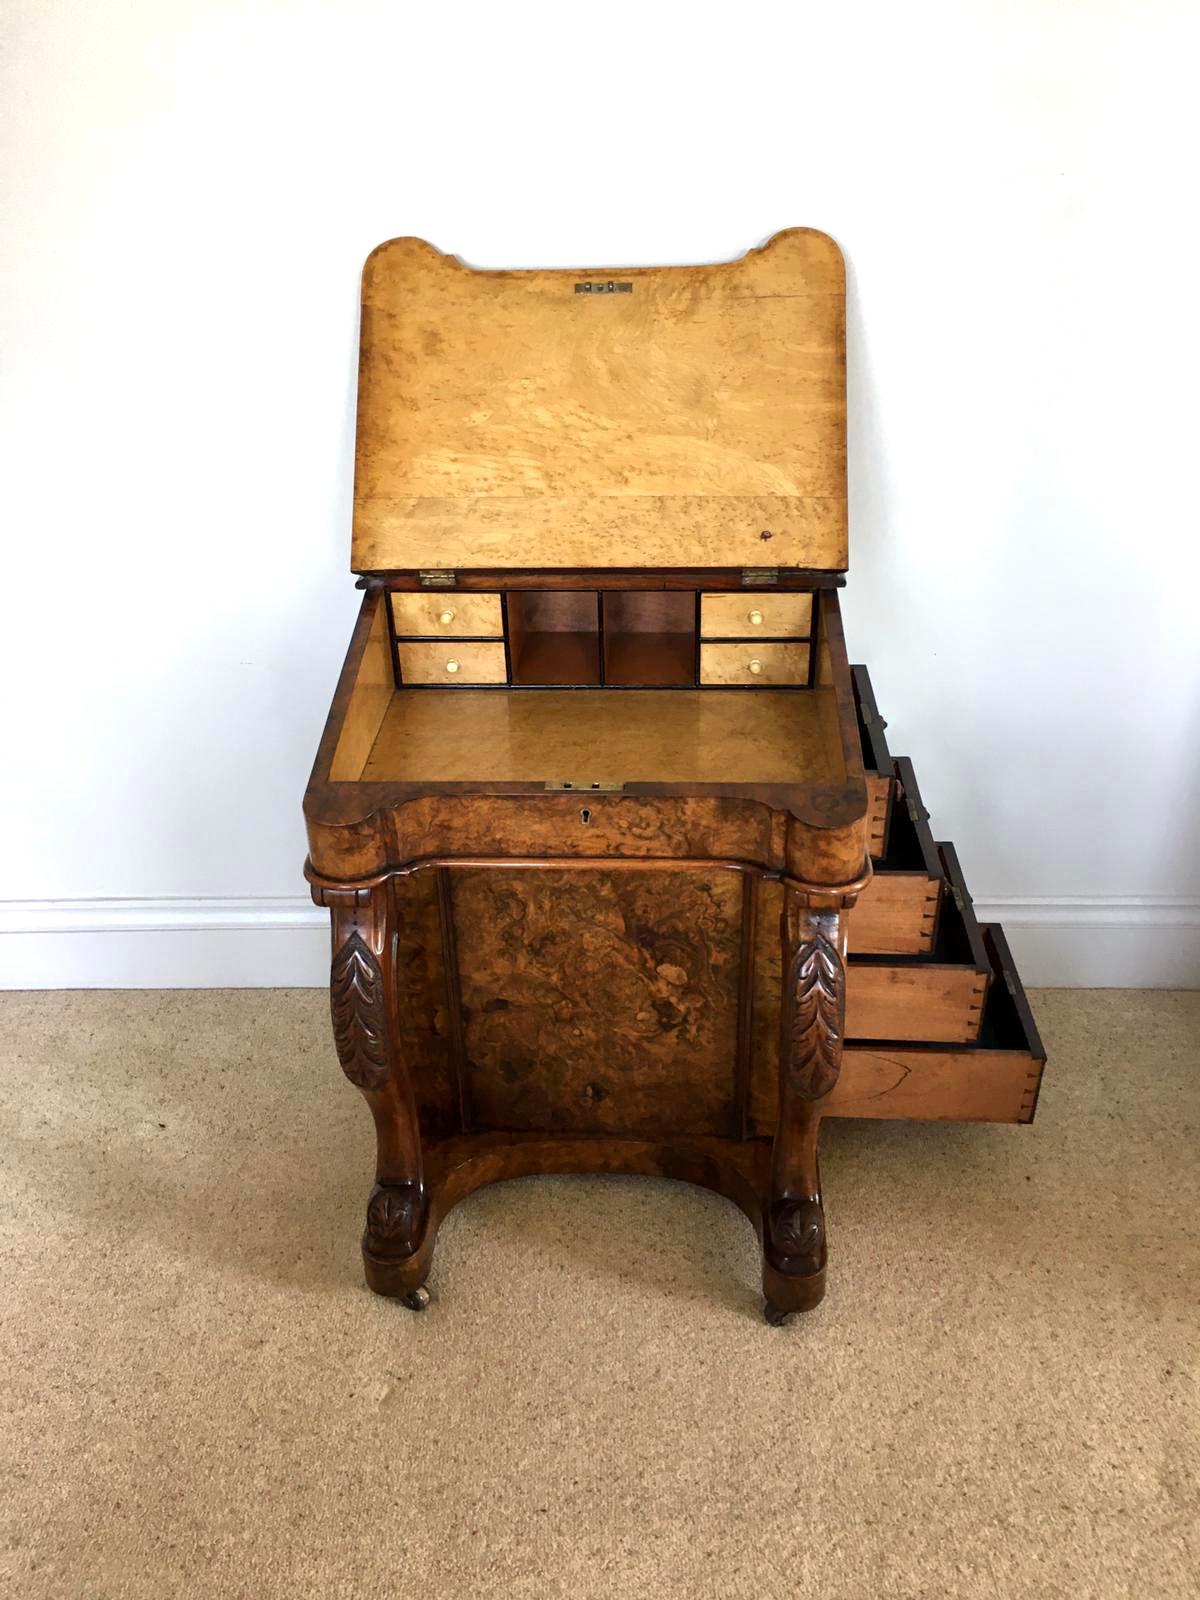 Quality antique Victorian burr walnut freestanding Davenport having a quality burr walnut top with original walnut gallery, shaped burr walnut lift up writing slope with original leather opening to reveal four drawers and pigeon holes, burr walnut